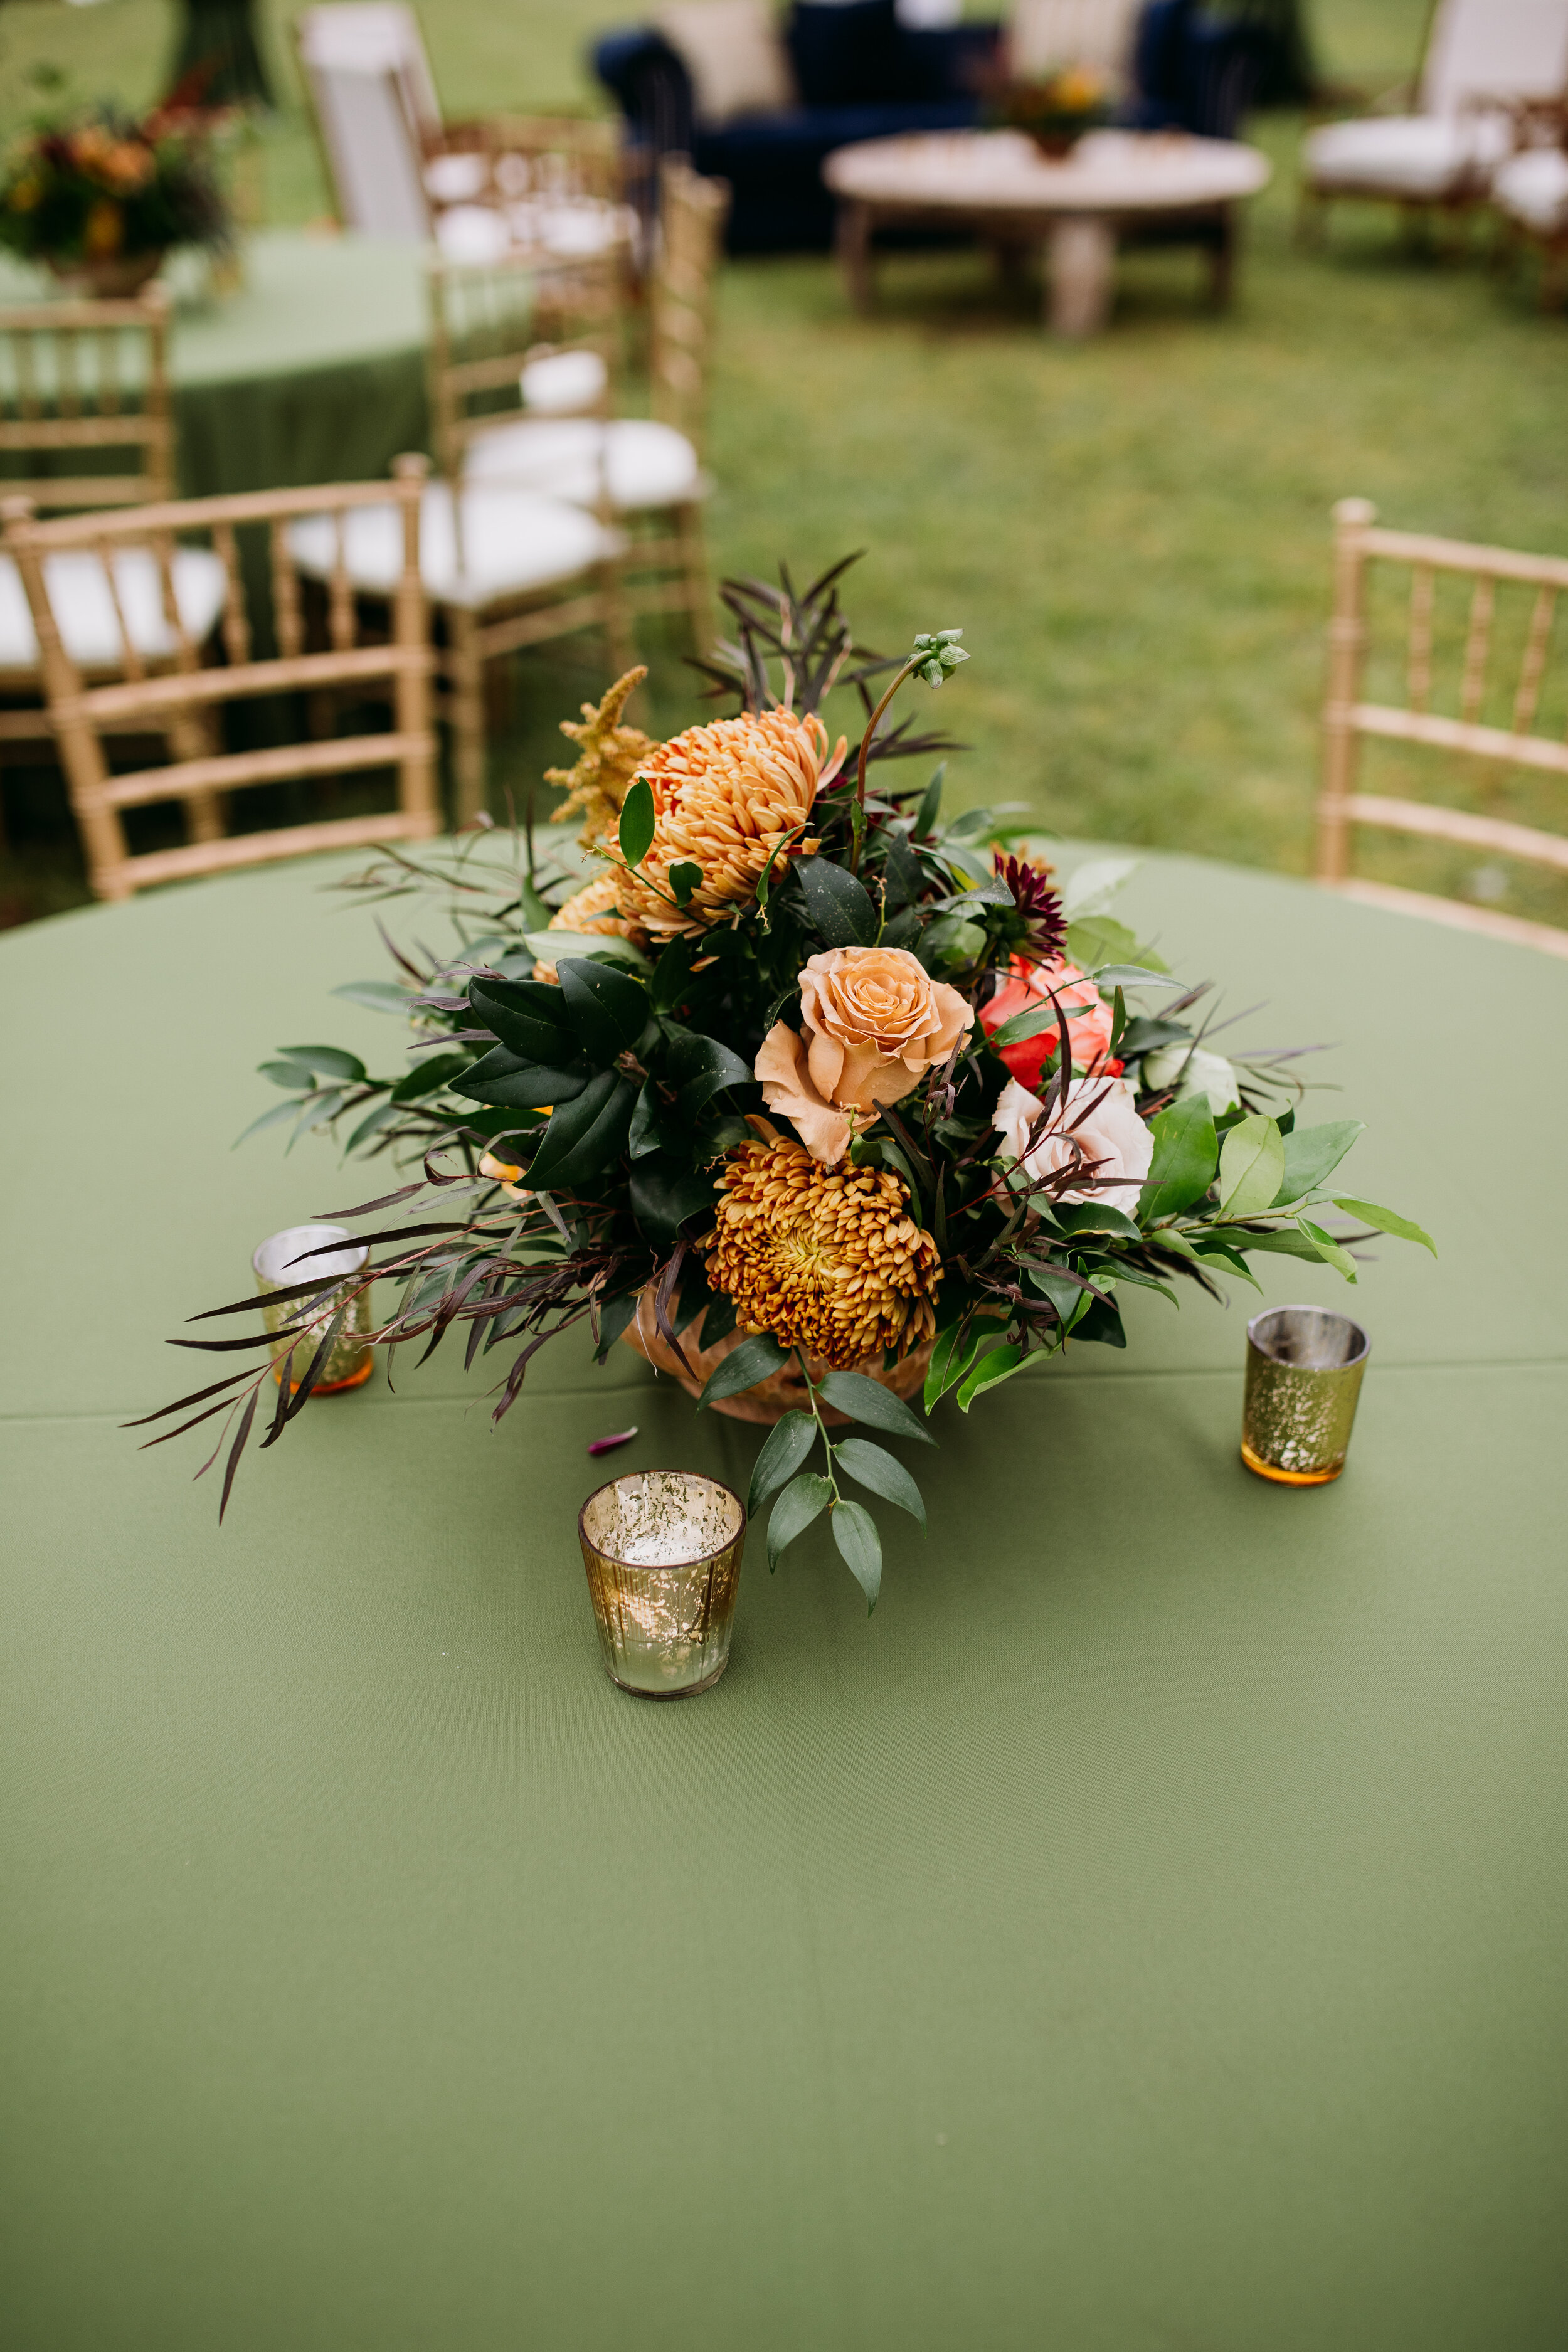 ivory-and-beau-florals-alex-and-david-red-gate-farms-wedding-flowers-wedding-florals-savannah-wedding-savannah-florist-wedding-florist-colorful-rich-bold-inspiration-flowers-Bowles43.jpg